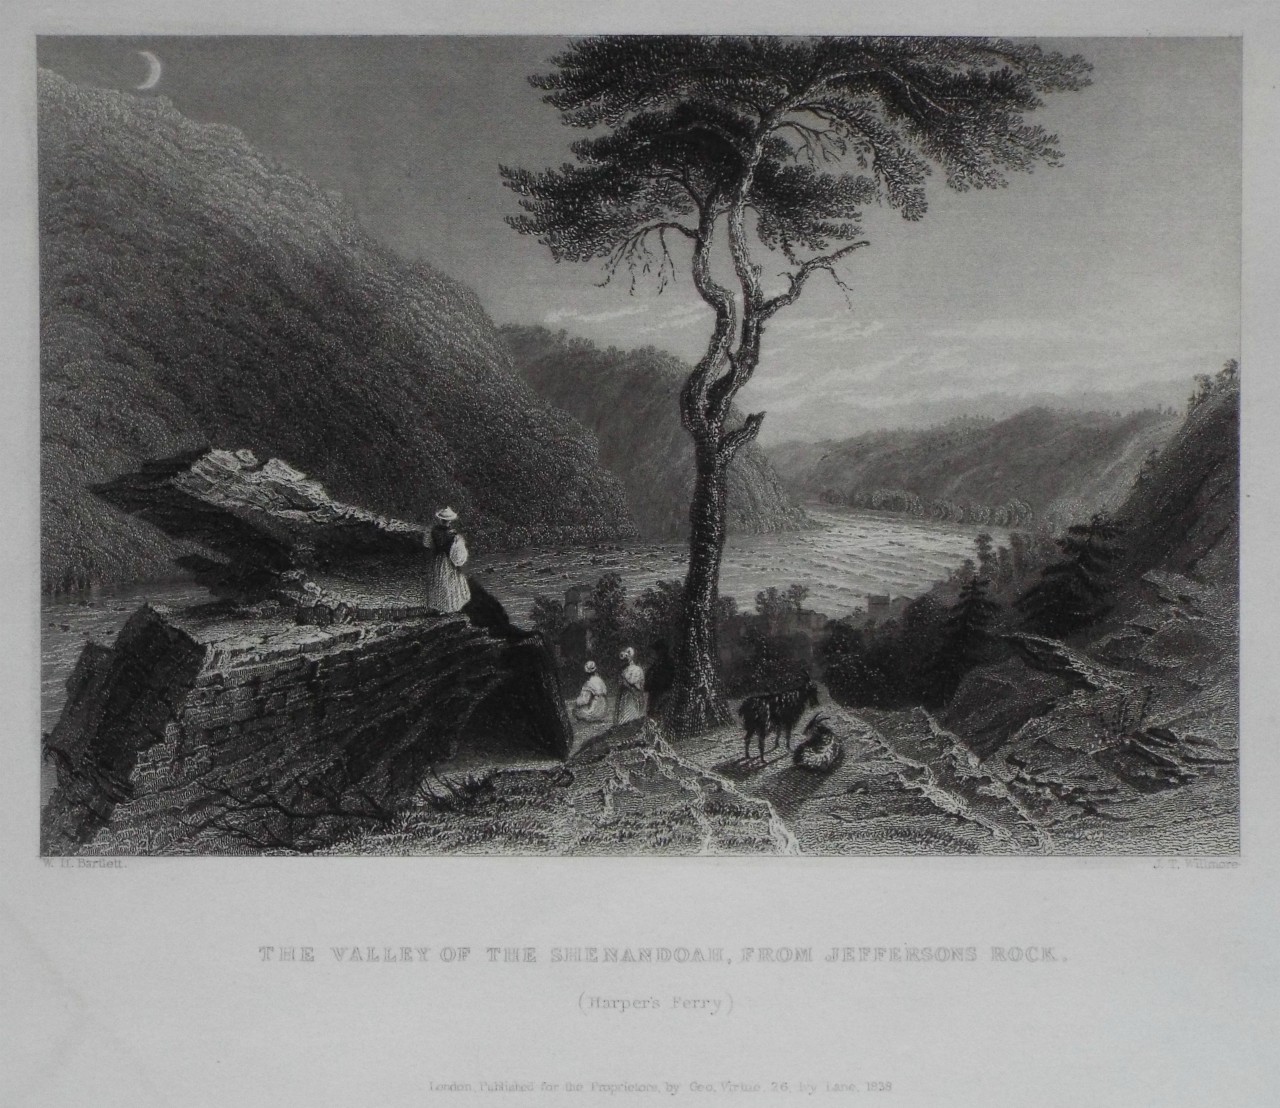 Print - The Valley of the Shenandoah, from Jeffersons Rock. (Harper's Ferry) - Willmore